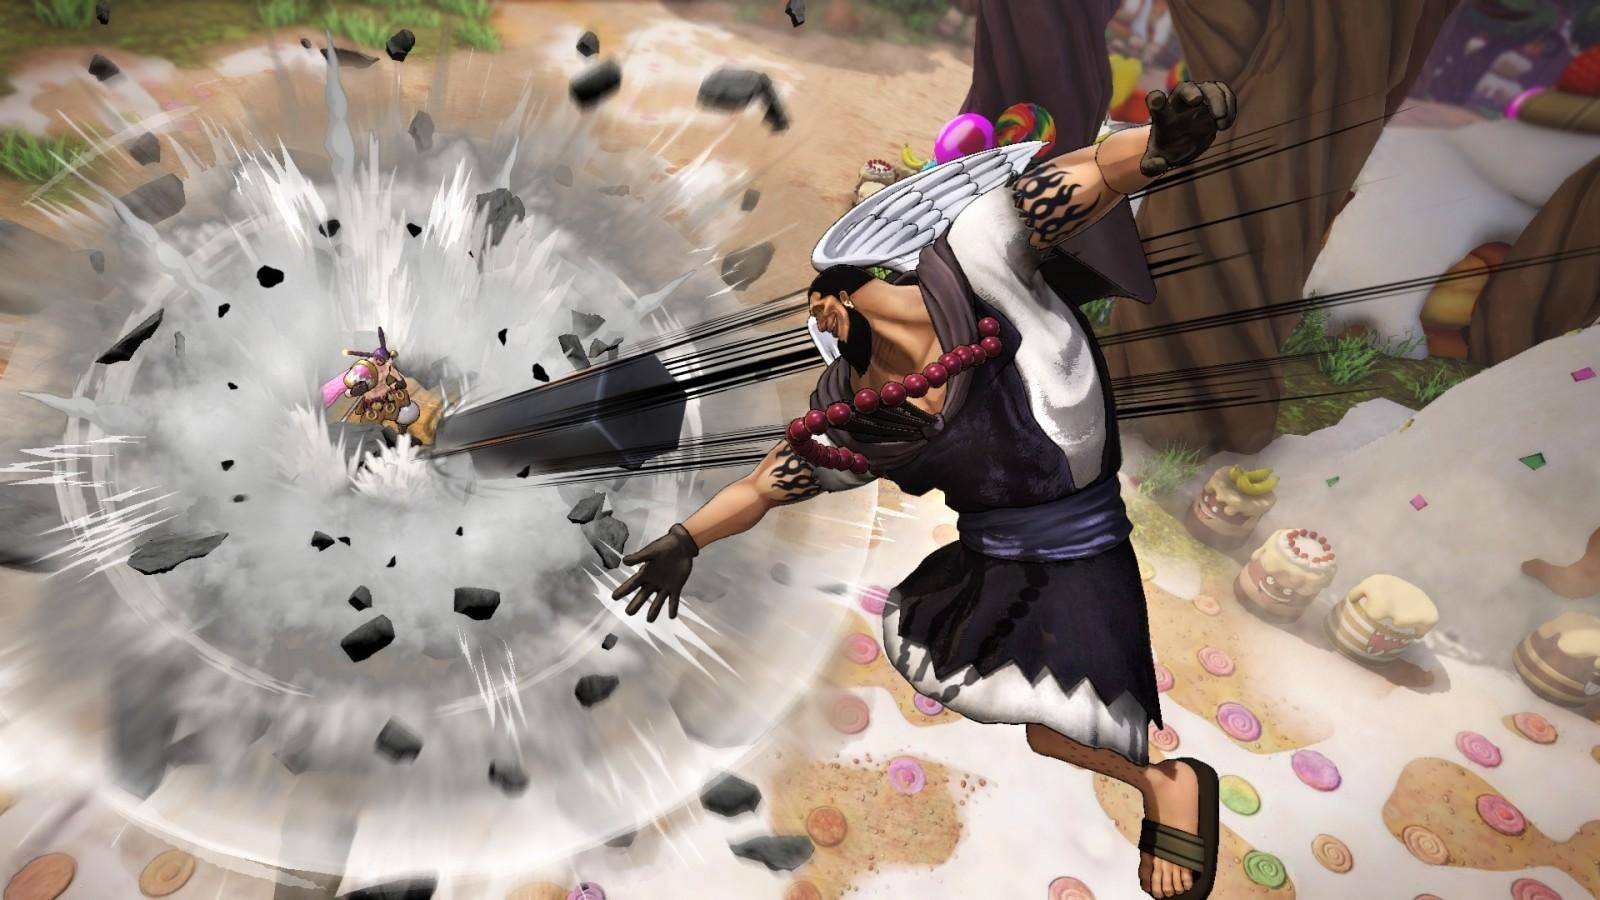 Urouge se une a One Piece: Pirate Warriors 4 1